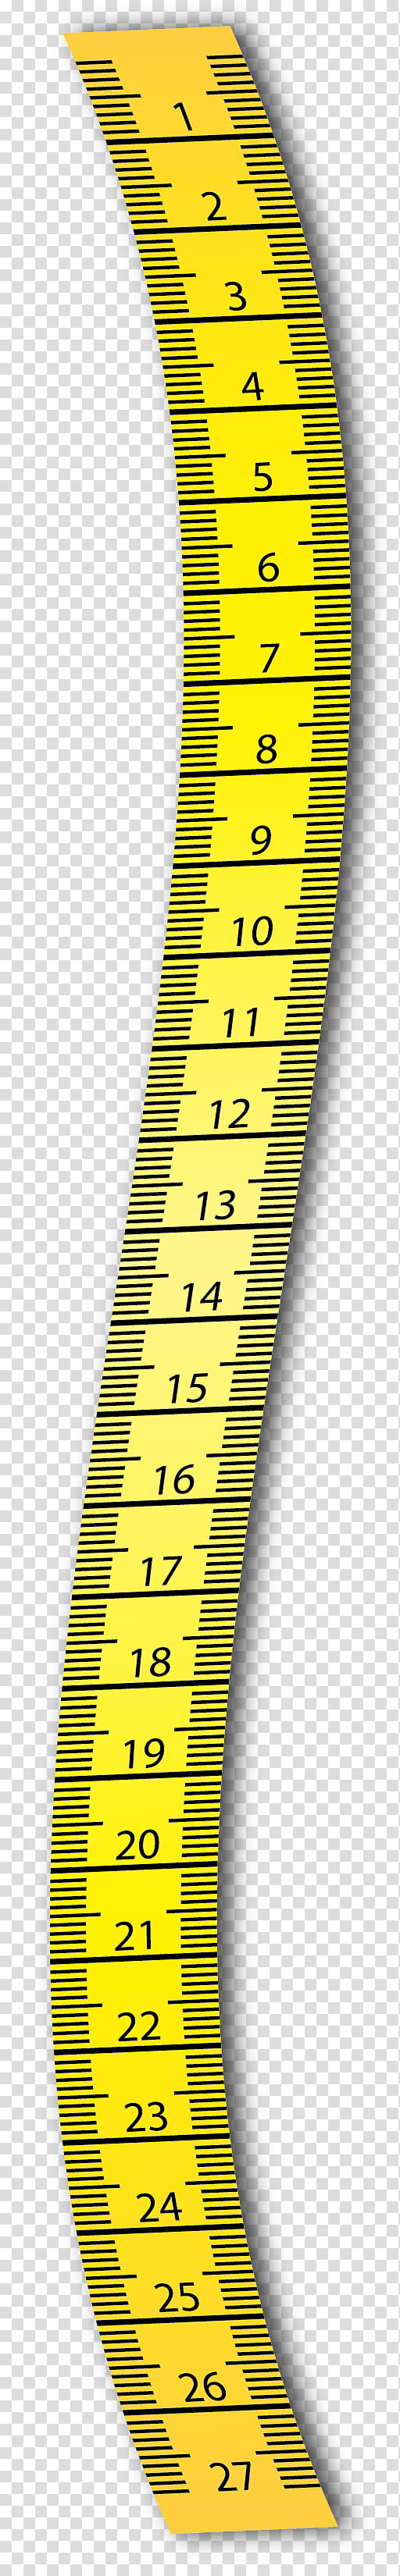 Ribbon Drawing, Tape Measures, Ruler, Measurement, Stanley Tape, Tailor, Textile, Yellow transparent background PNG clipart